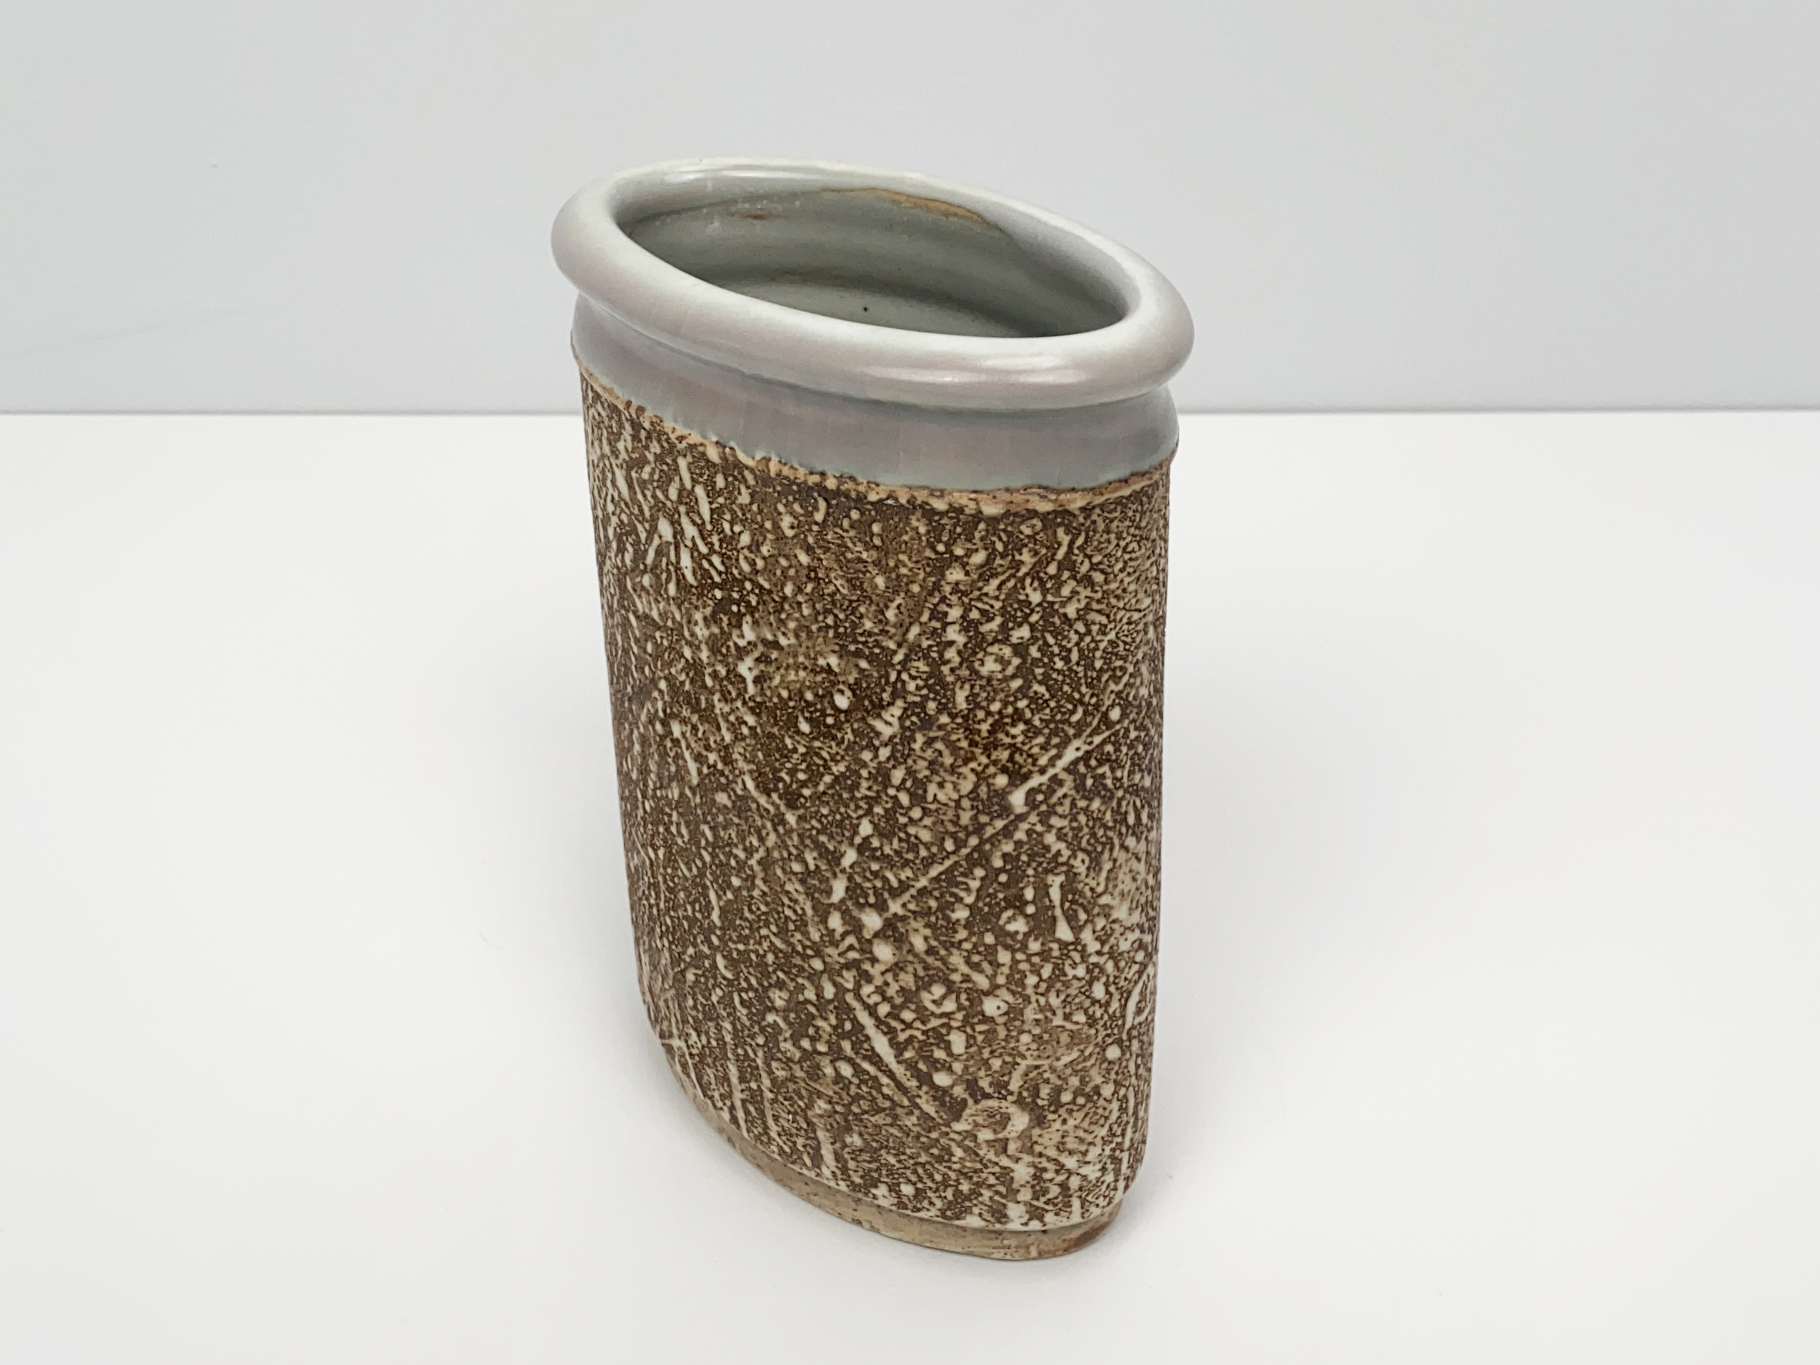 Vase, Ceramic, Stoneware, Unique Piece, incised Decoration painted with light brown Engobe, upper Rim and Inside glazed, by Wilhelm & Elly Kuch, 1980s